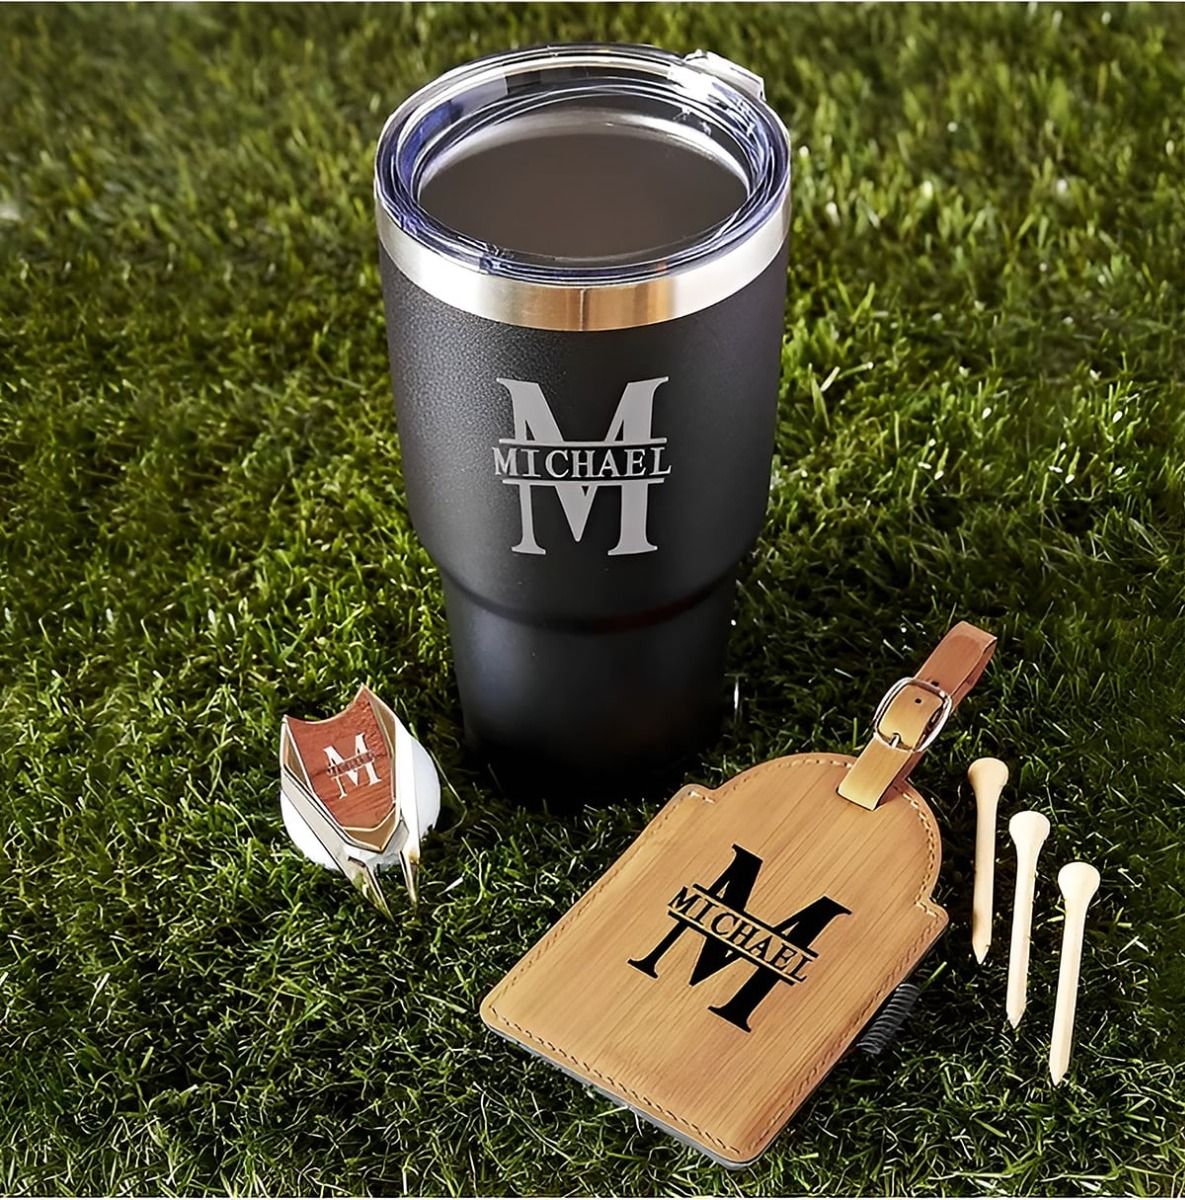 https://images.homewetbar.com/media/catalog/product/o/a/oakmont-personalized-golf-gifts-for-men-p-8928.jpg?store=default&image-type=image